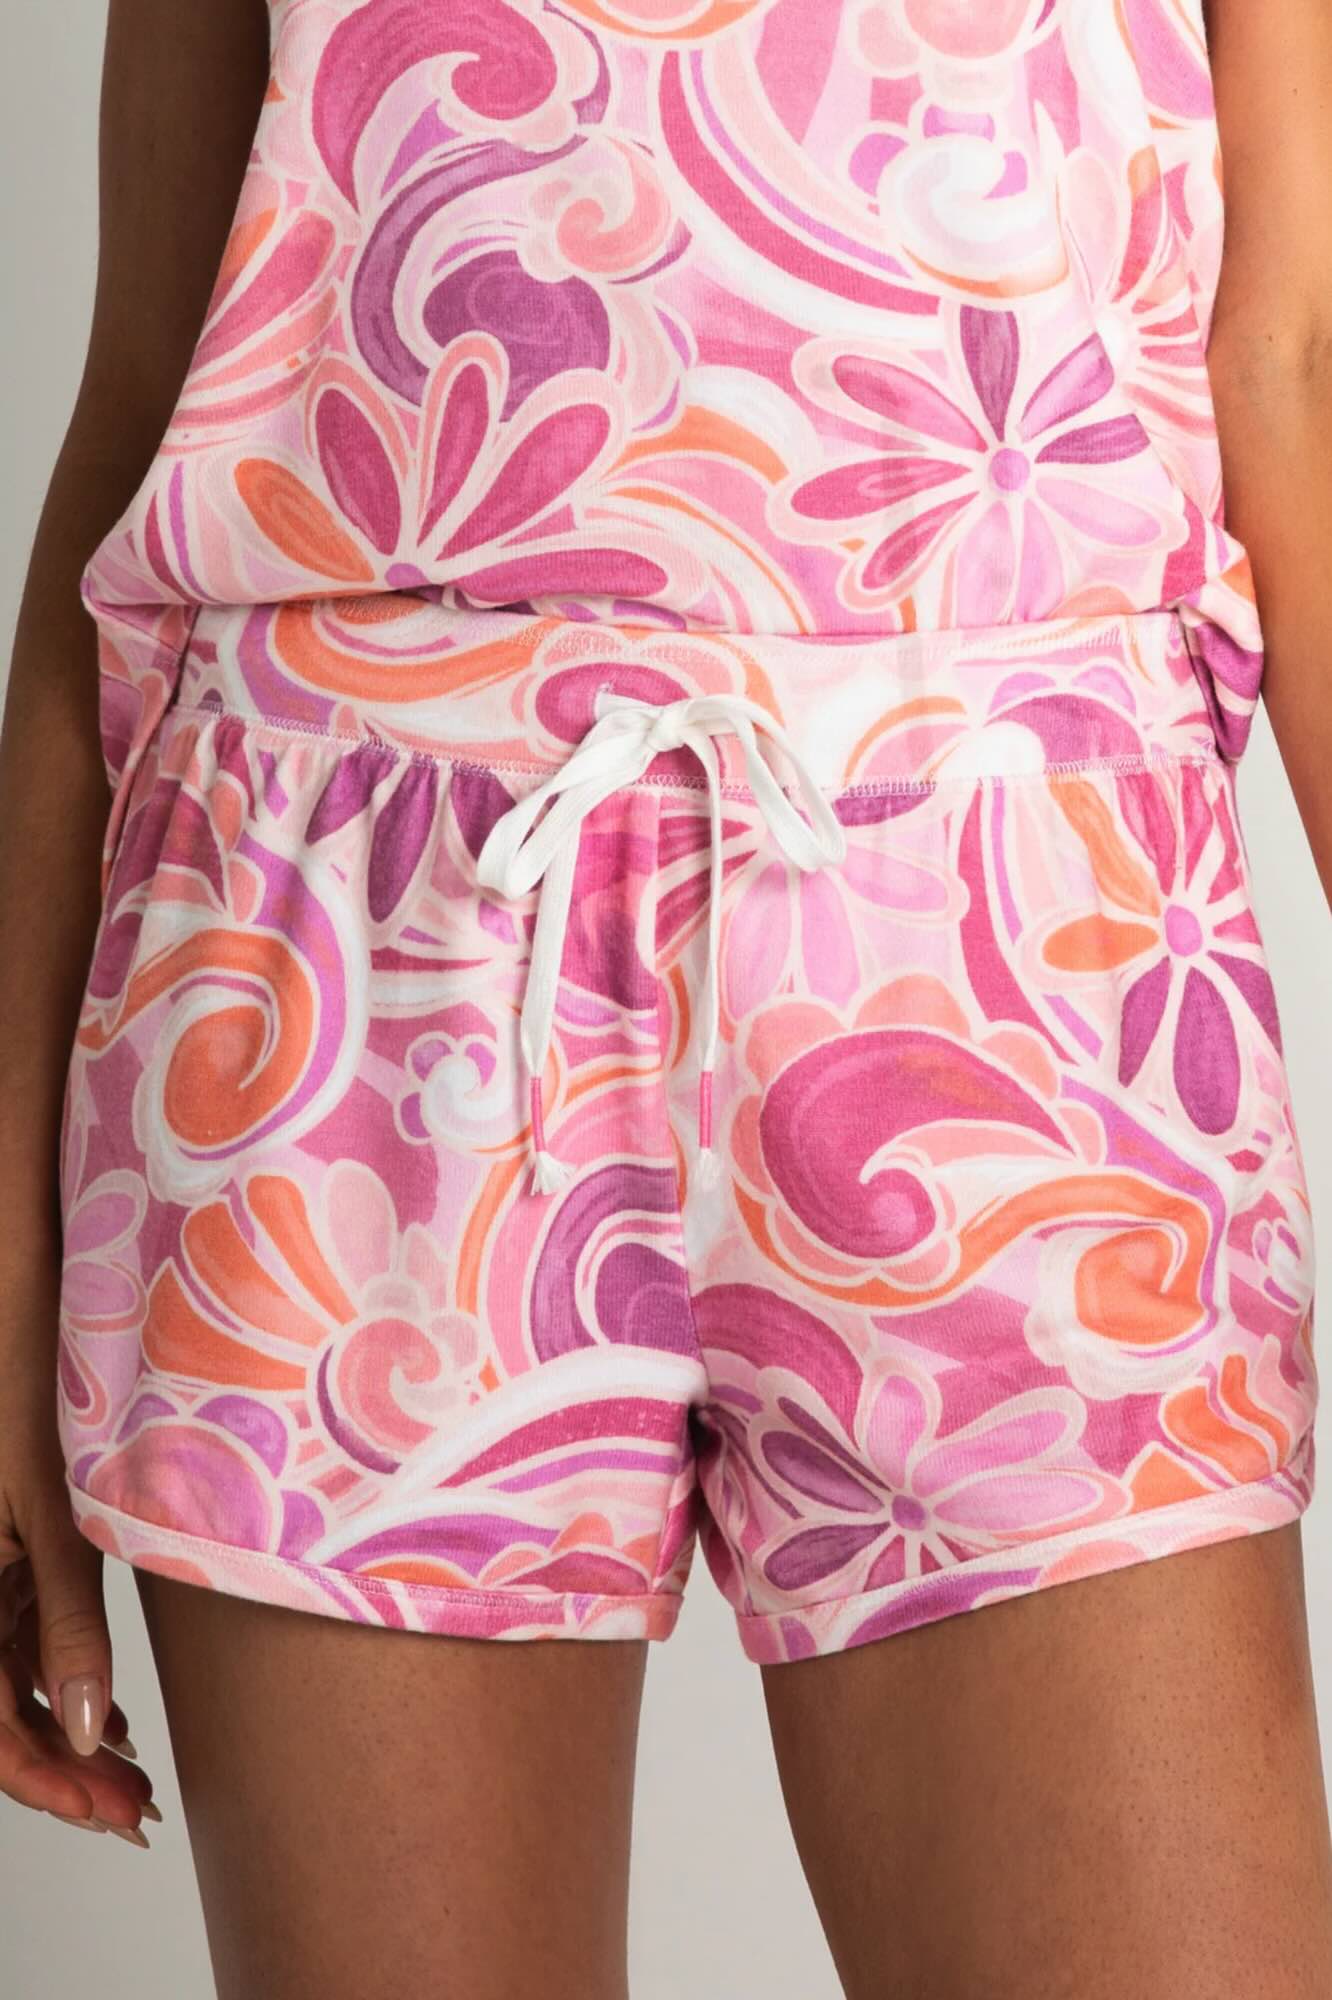 Stay Groovy shorts